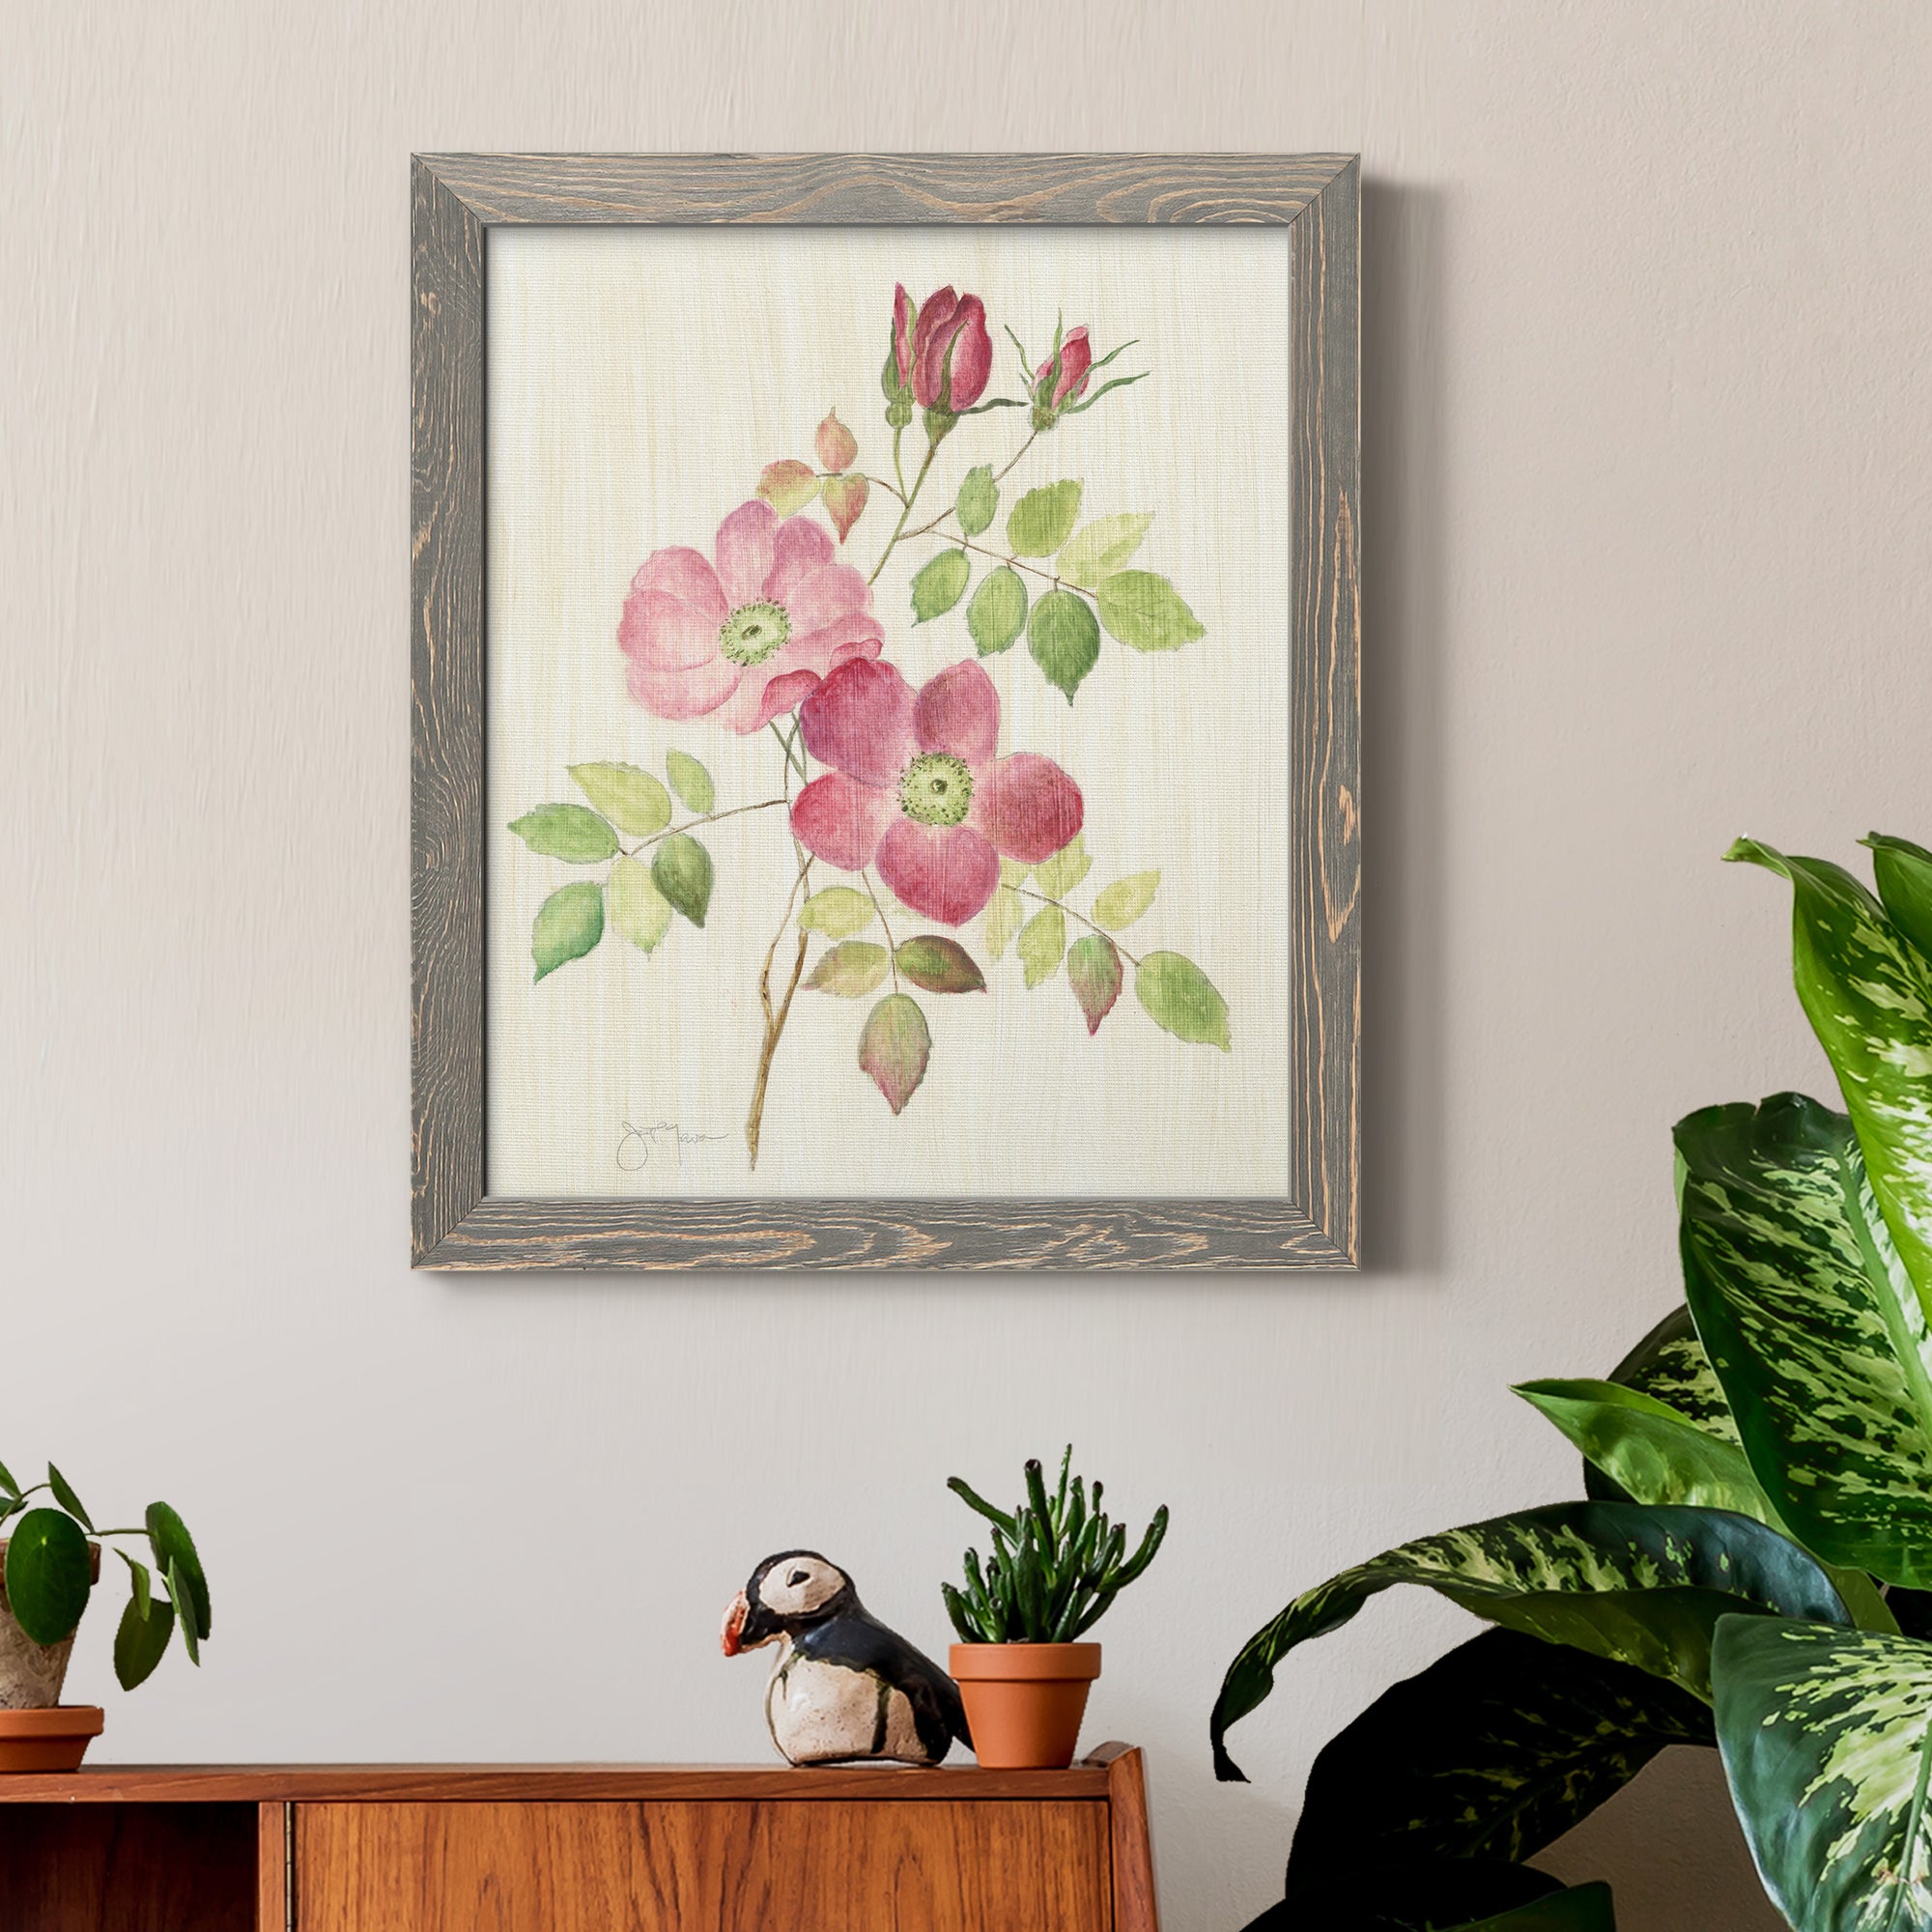 Dusty Rose I - Premium Canvas Framed in Barnwood - Ready to Hang